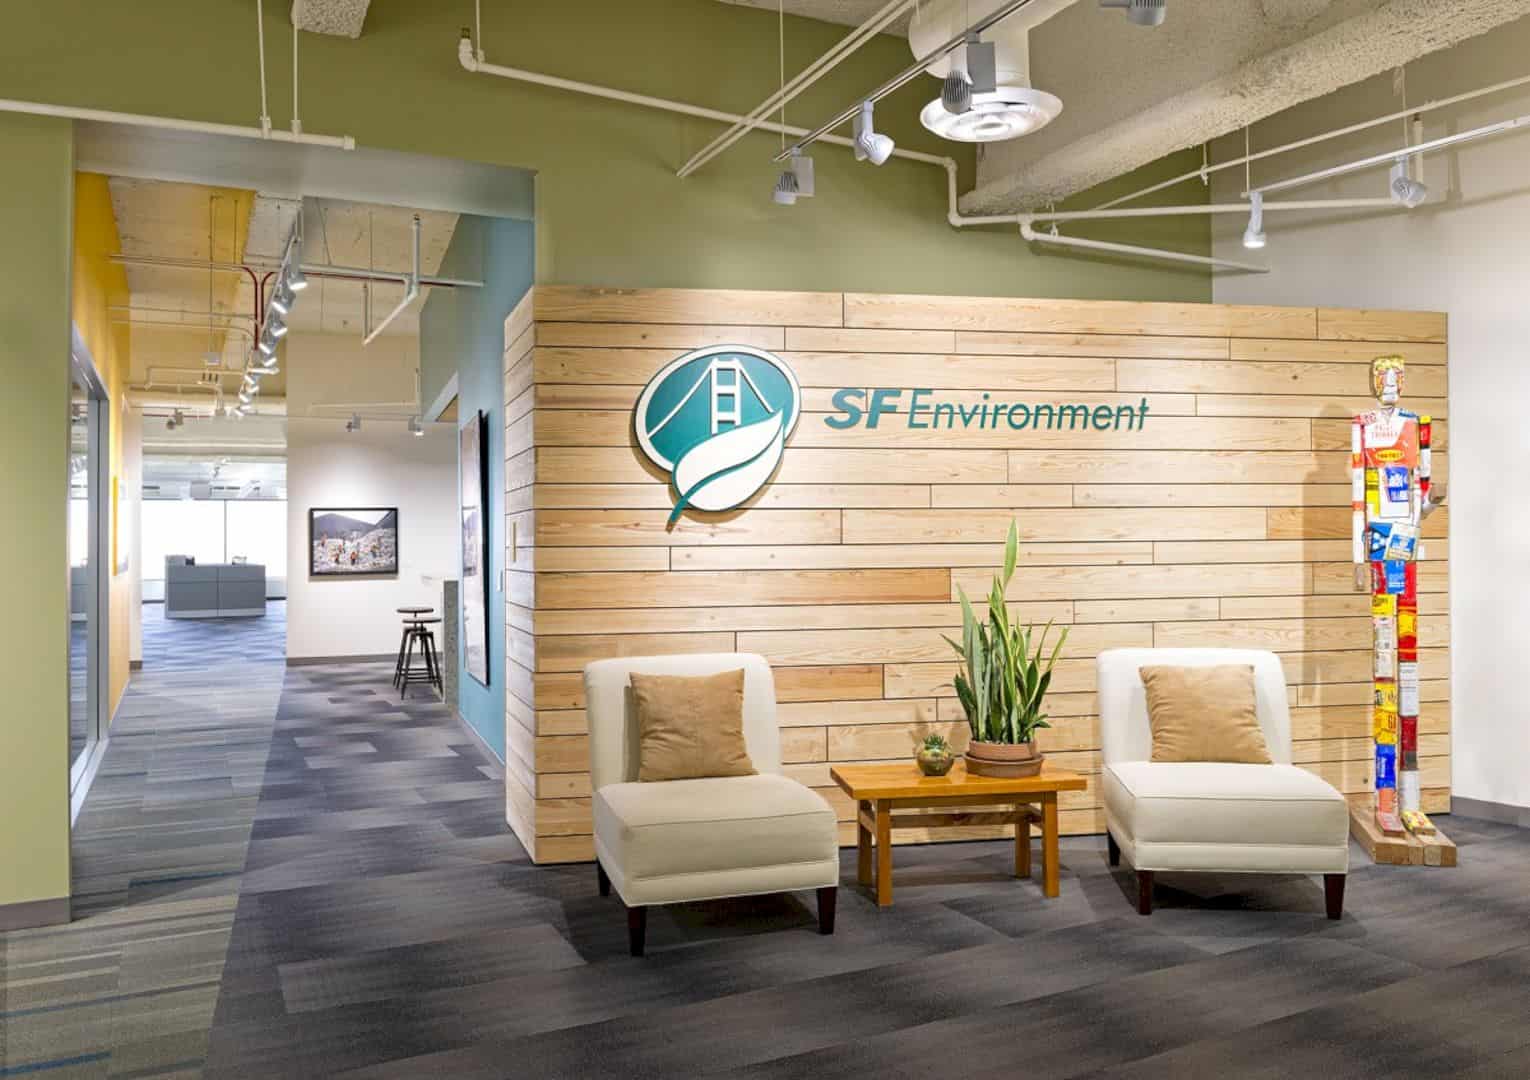 Sf Environment A Bright City Department That Promotes Sustainable Programs 11